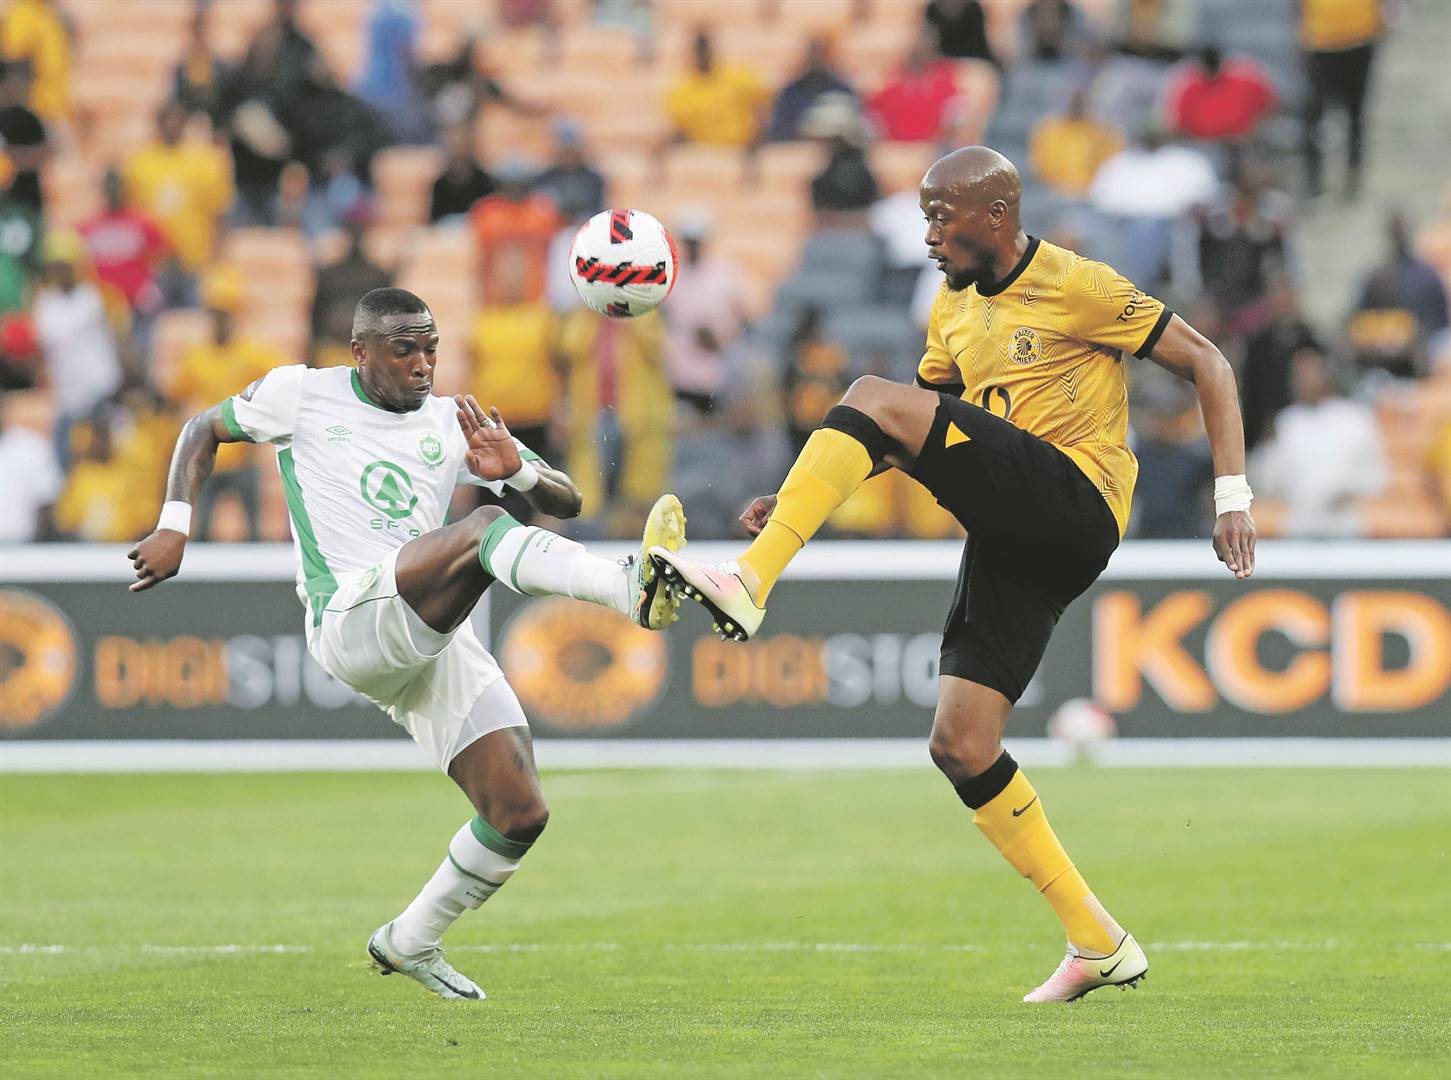 Chiefs rue penalty miss after dropping two points against AmaZulu